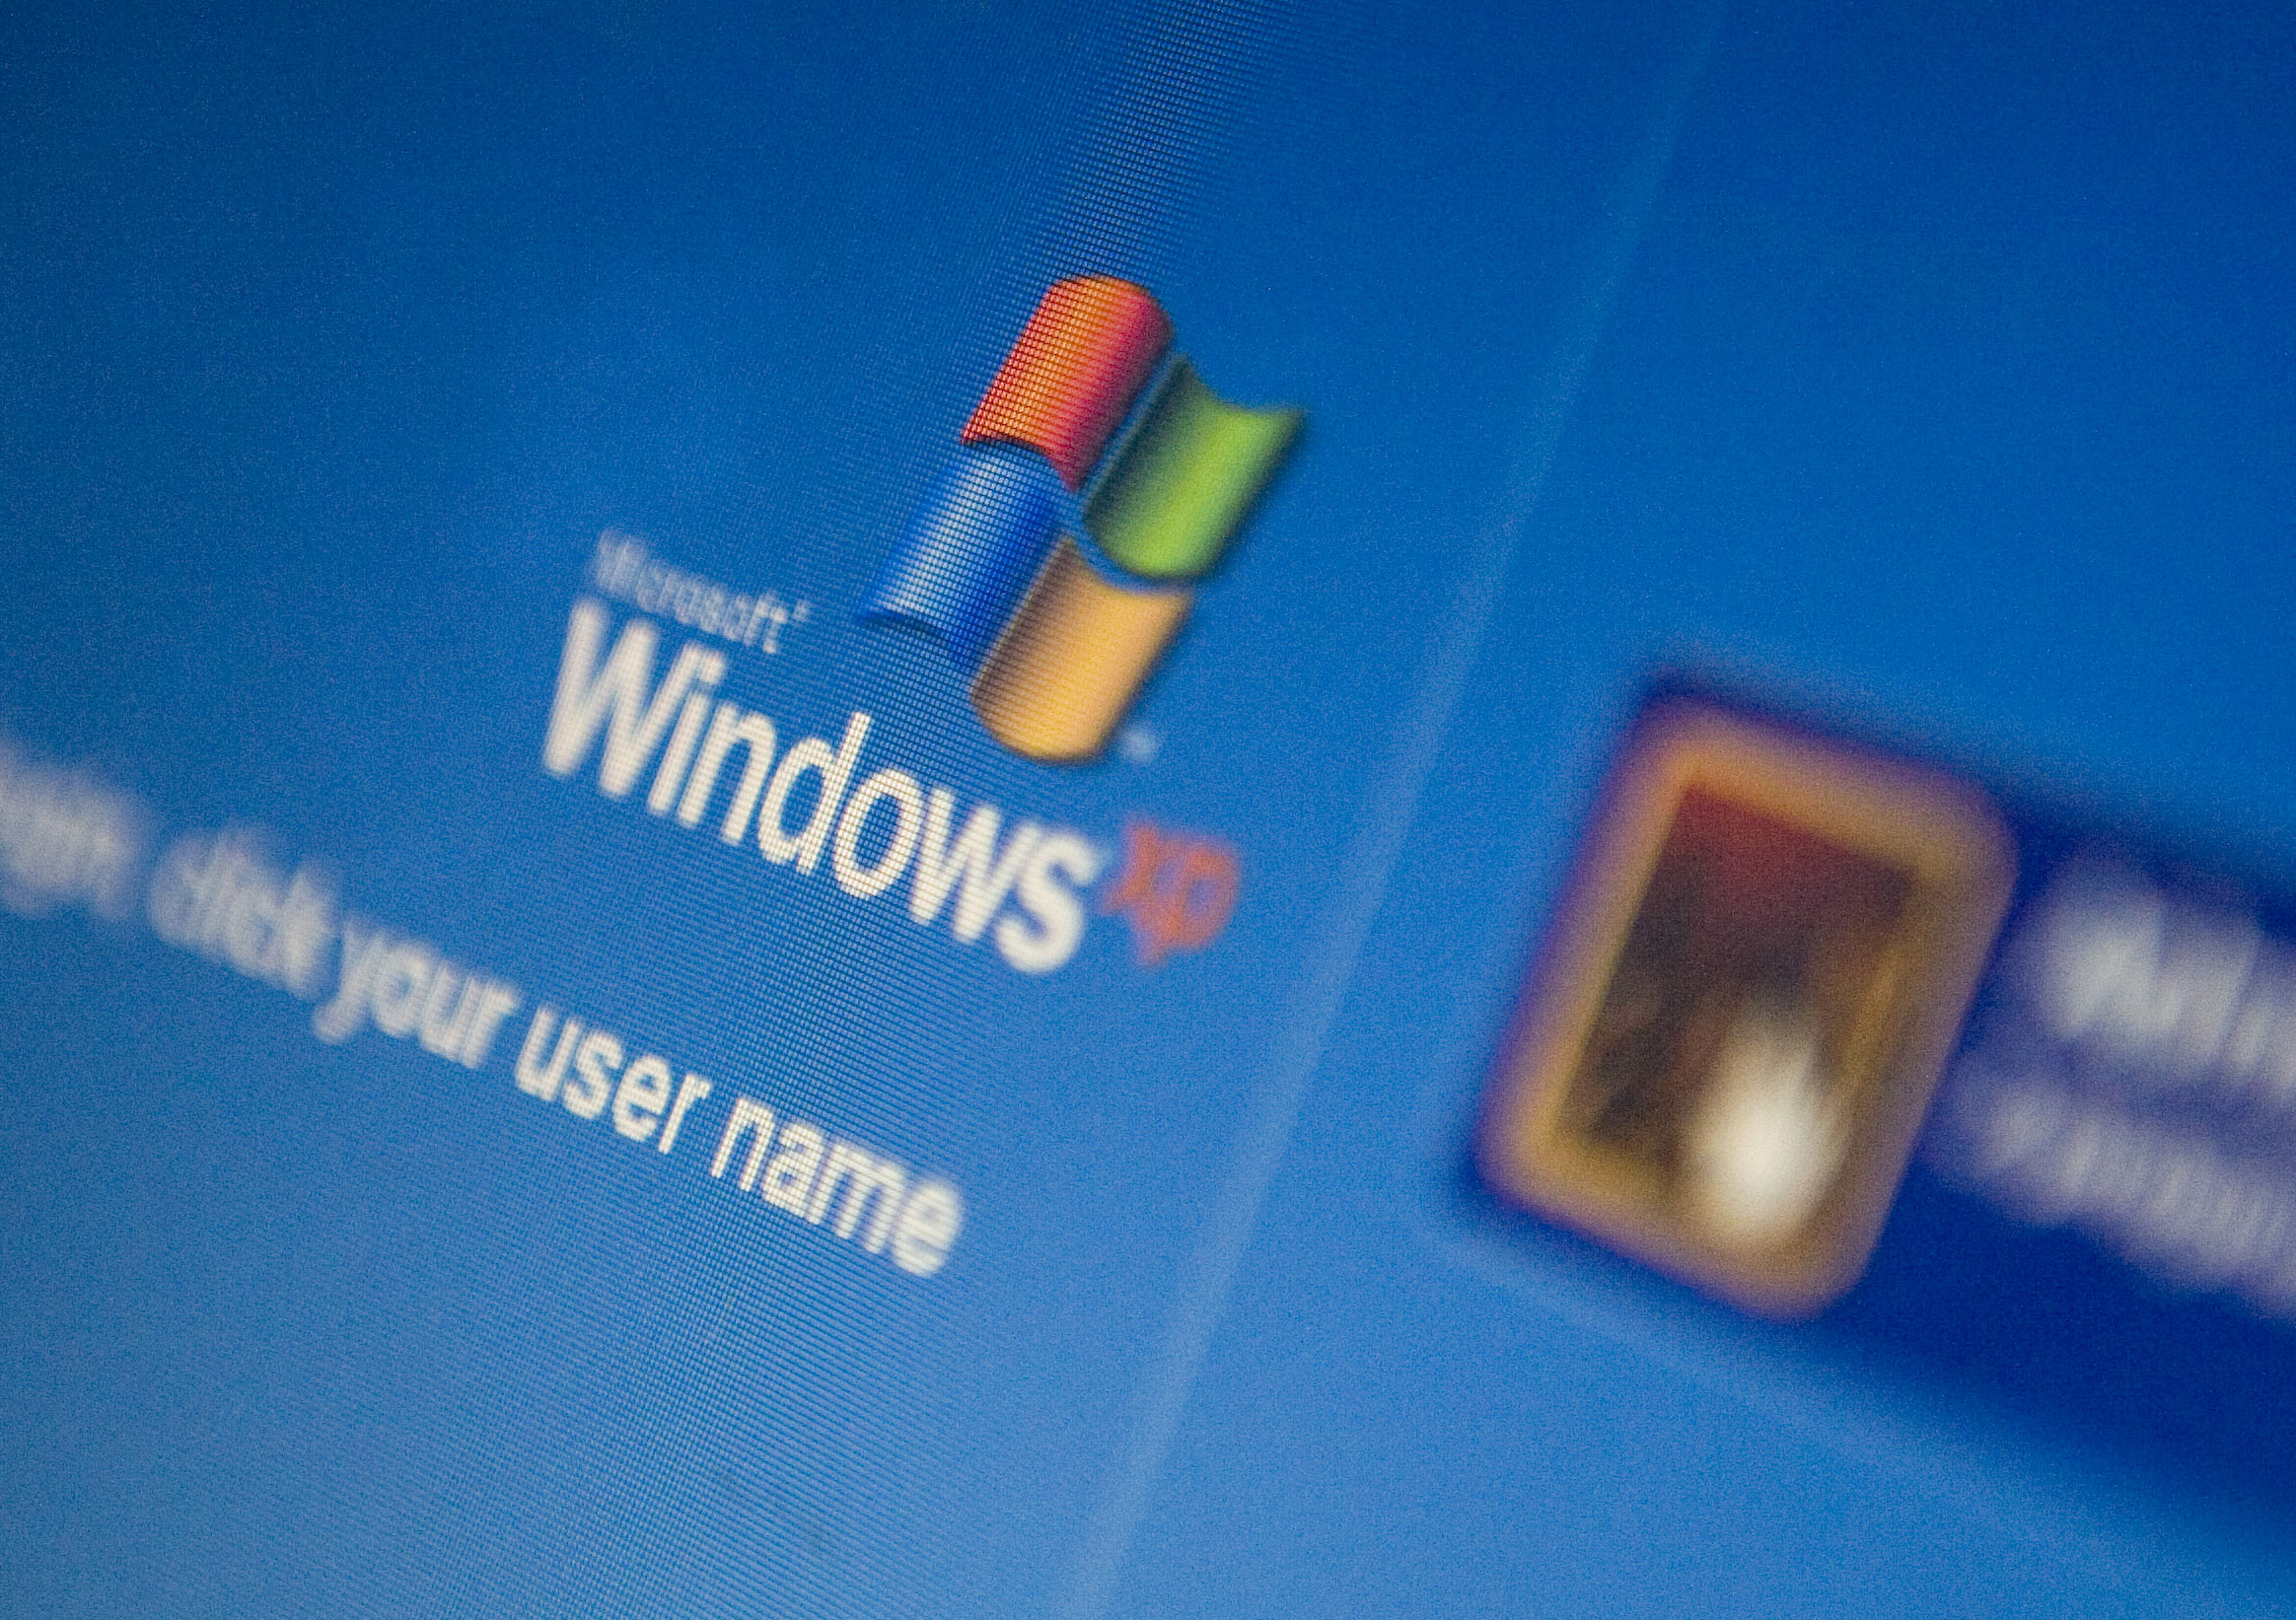 The Microsoft Windows XP log-in screen is displayed on a lap